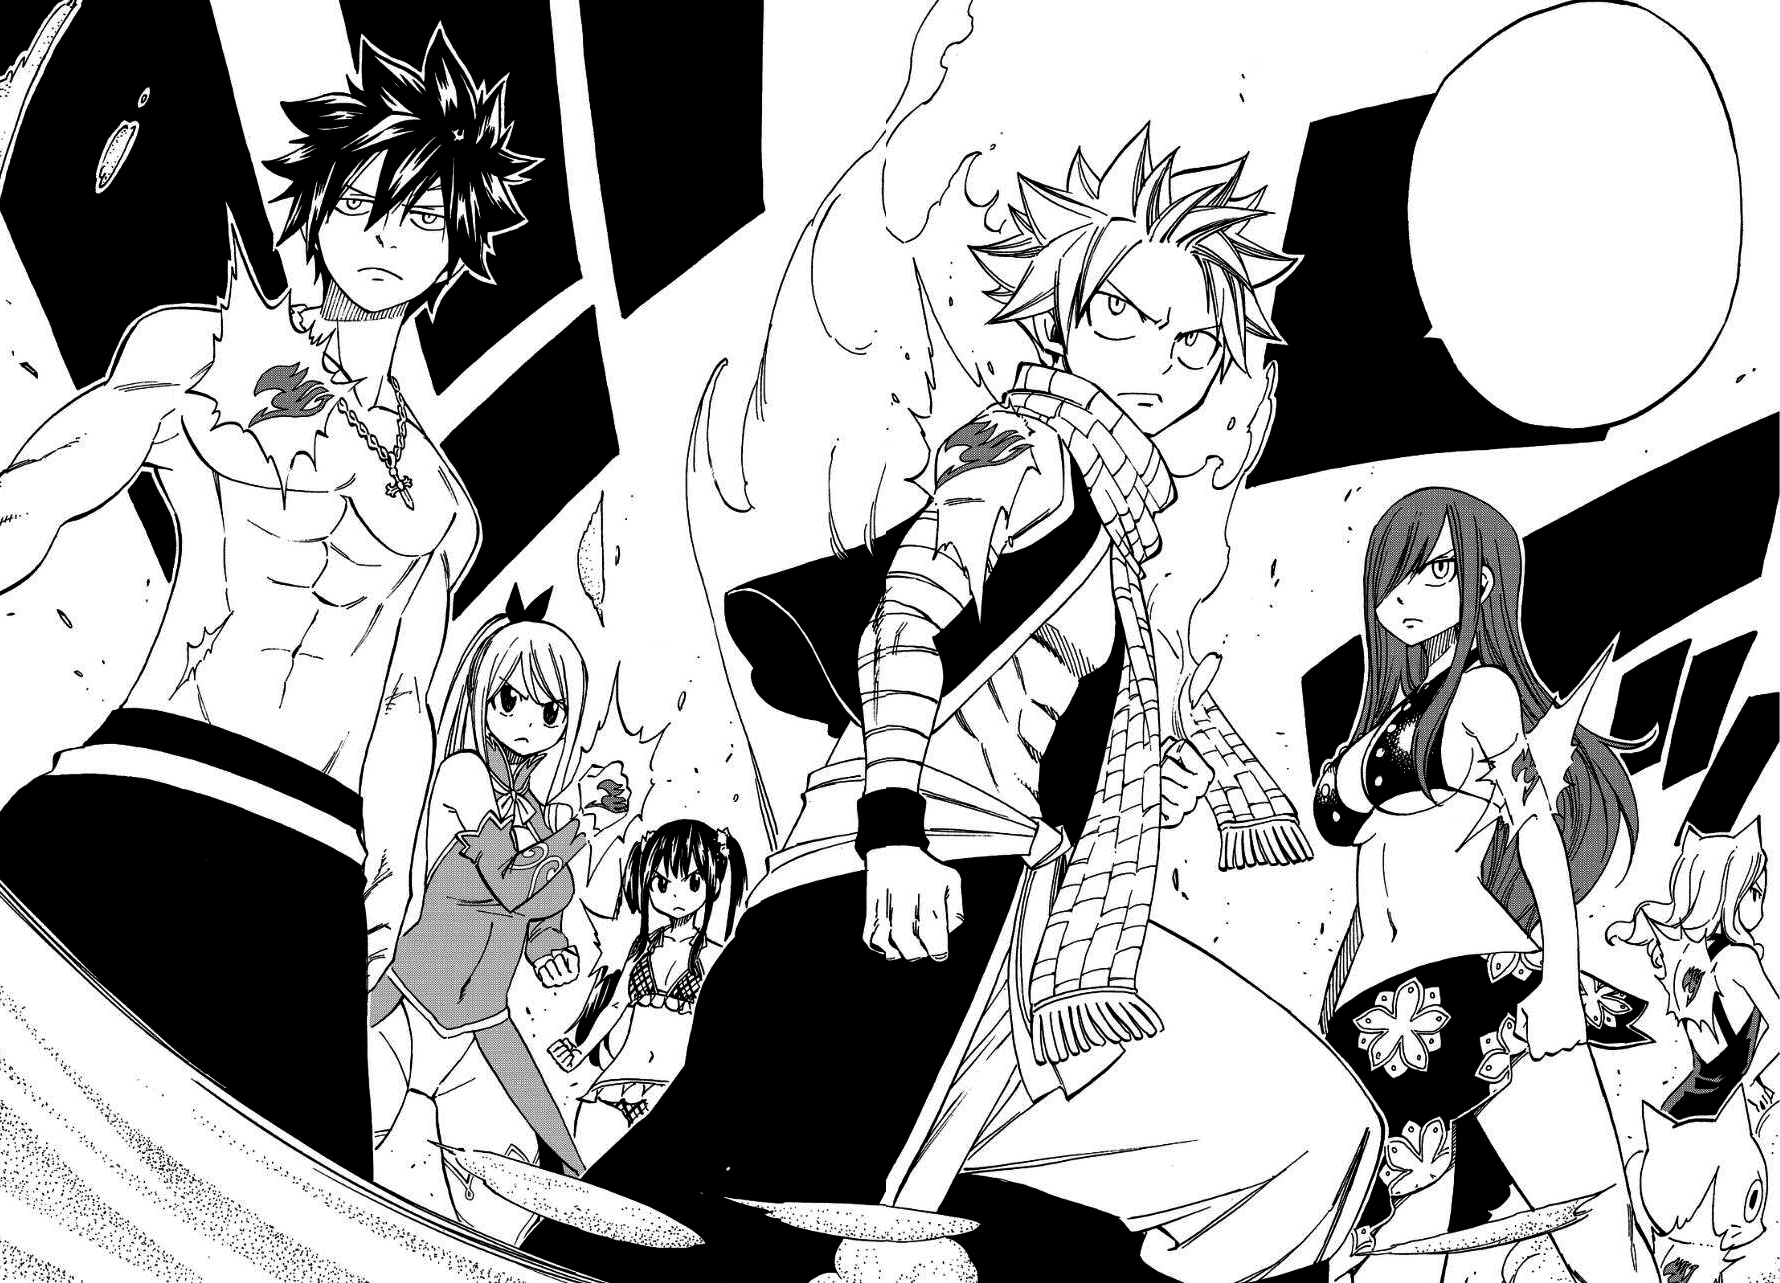  Review for Fairy Tail: Part 12